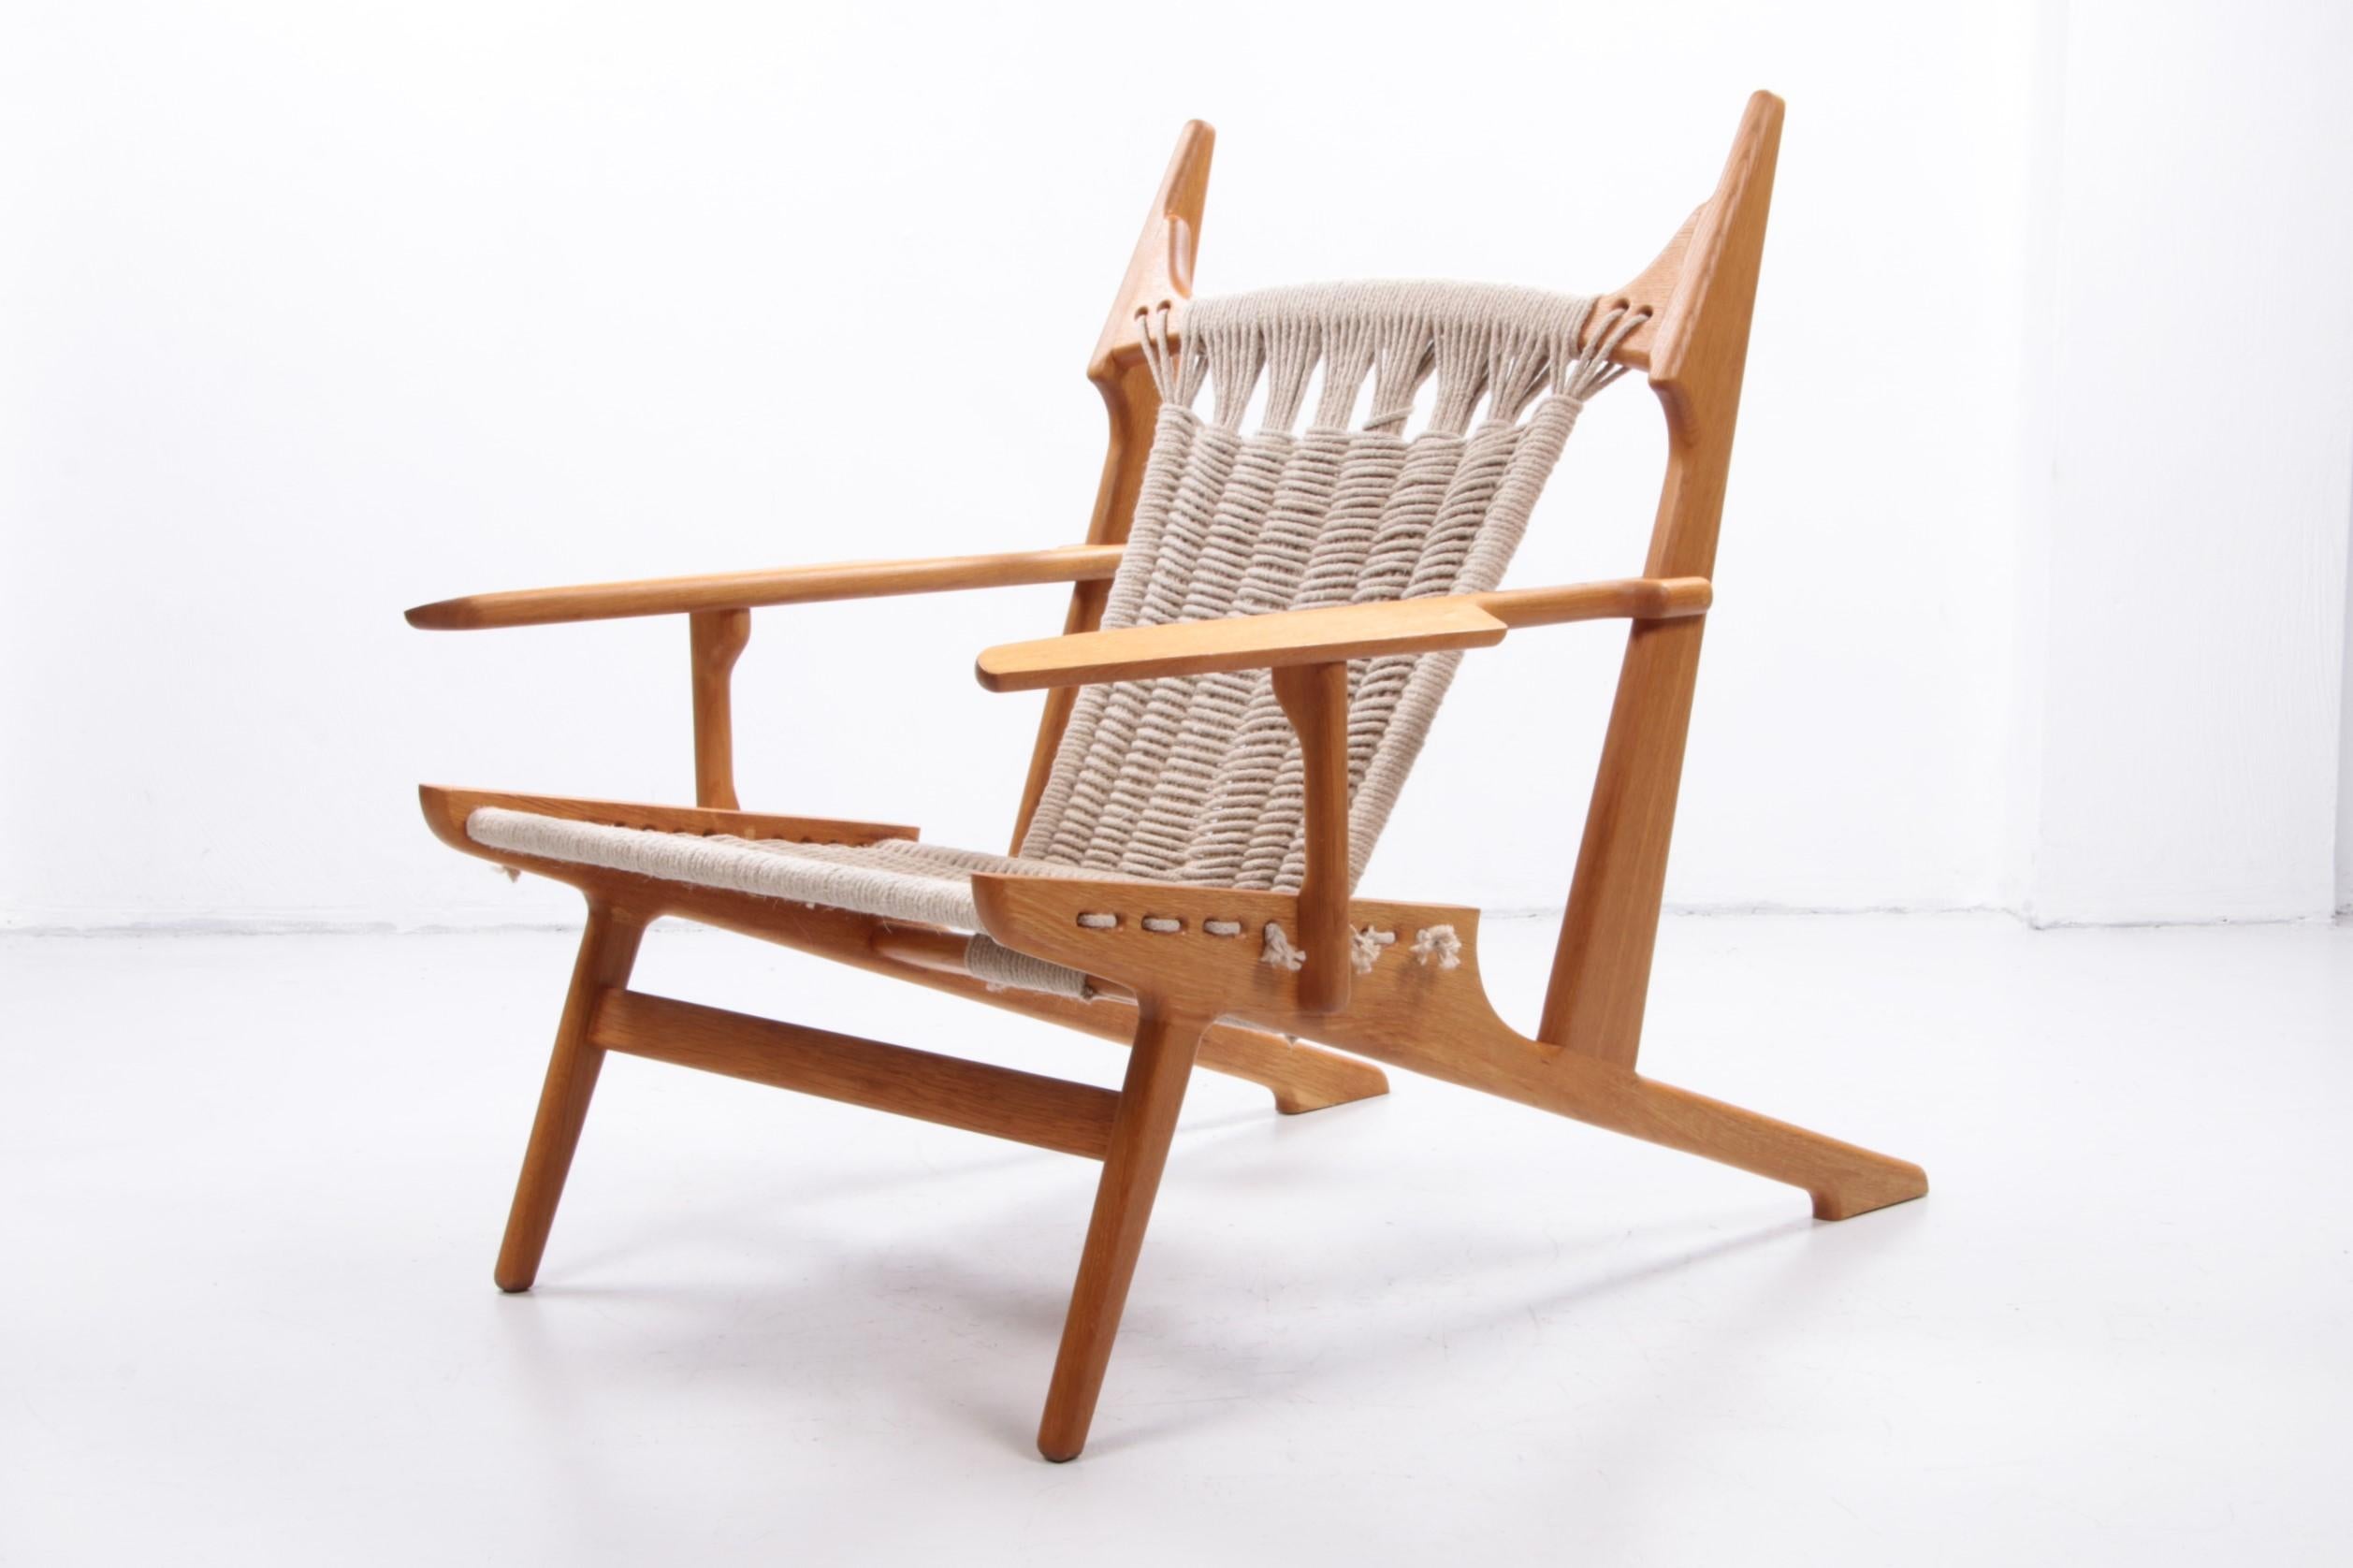 Rope Design Set Lounge Chairs Design and Handmade by Martin Godsk 1990 Denmark For Sale